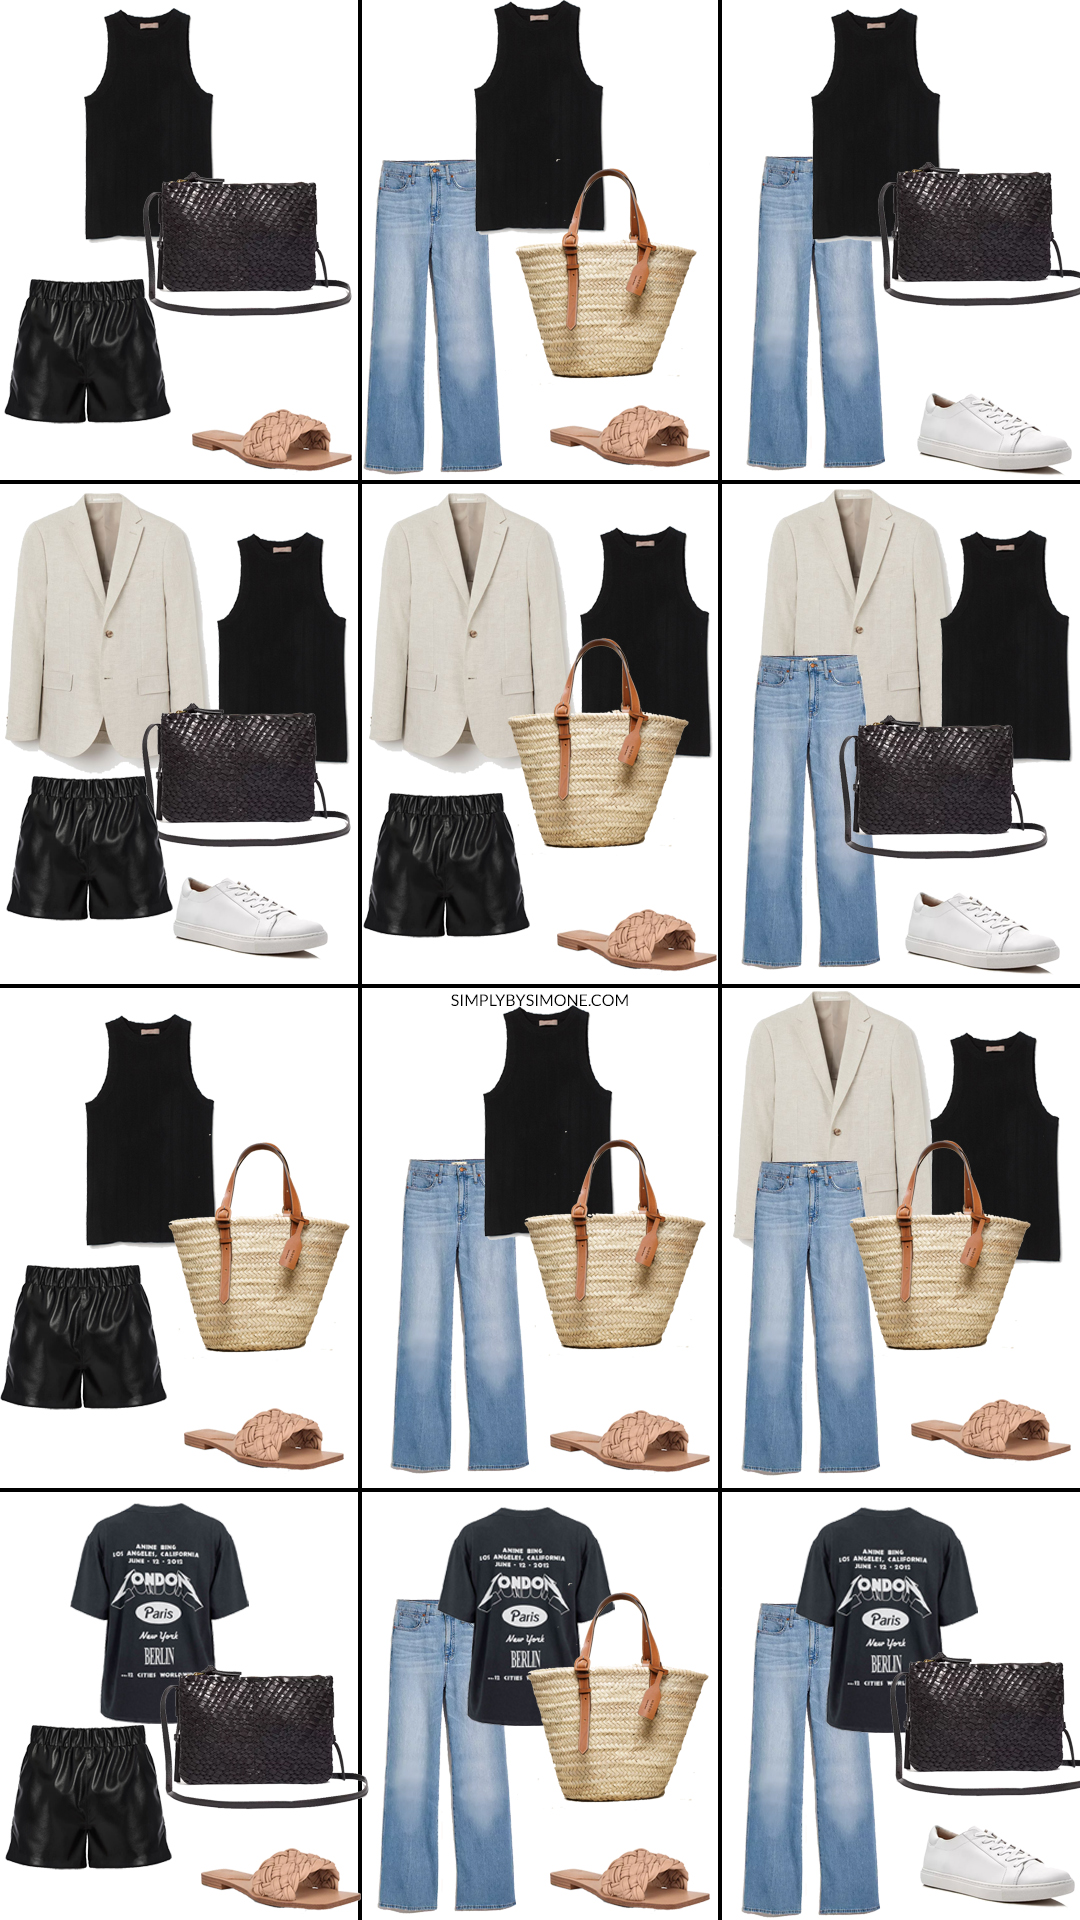 Summer Capsule Wardrobe - 11 Items 36 Outfit Ideas for Summer - Looks 1-12